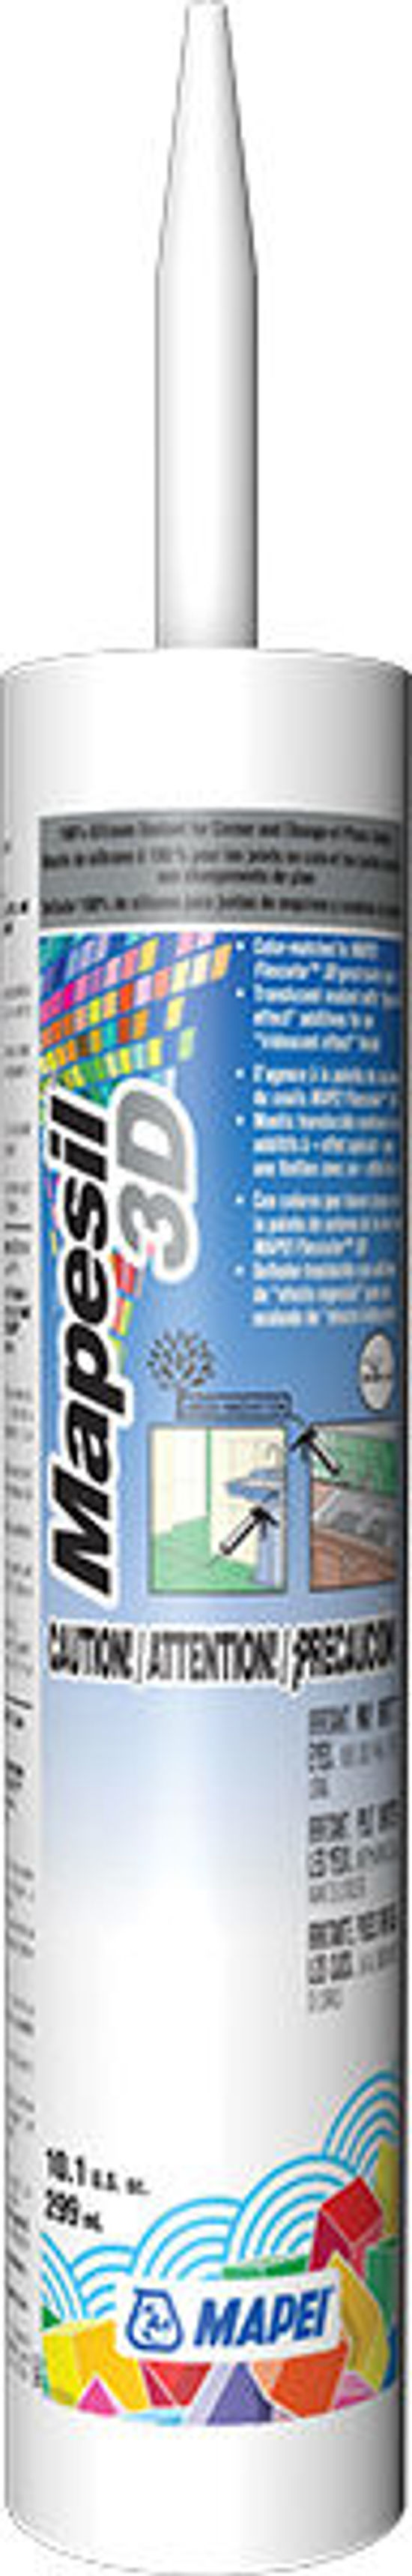 Mapesil 3D 100% Silicone Sealant with an “Iridescent Effect” #5207 Champagne Bubbles 10.11 oz